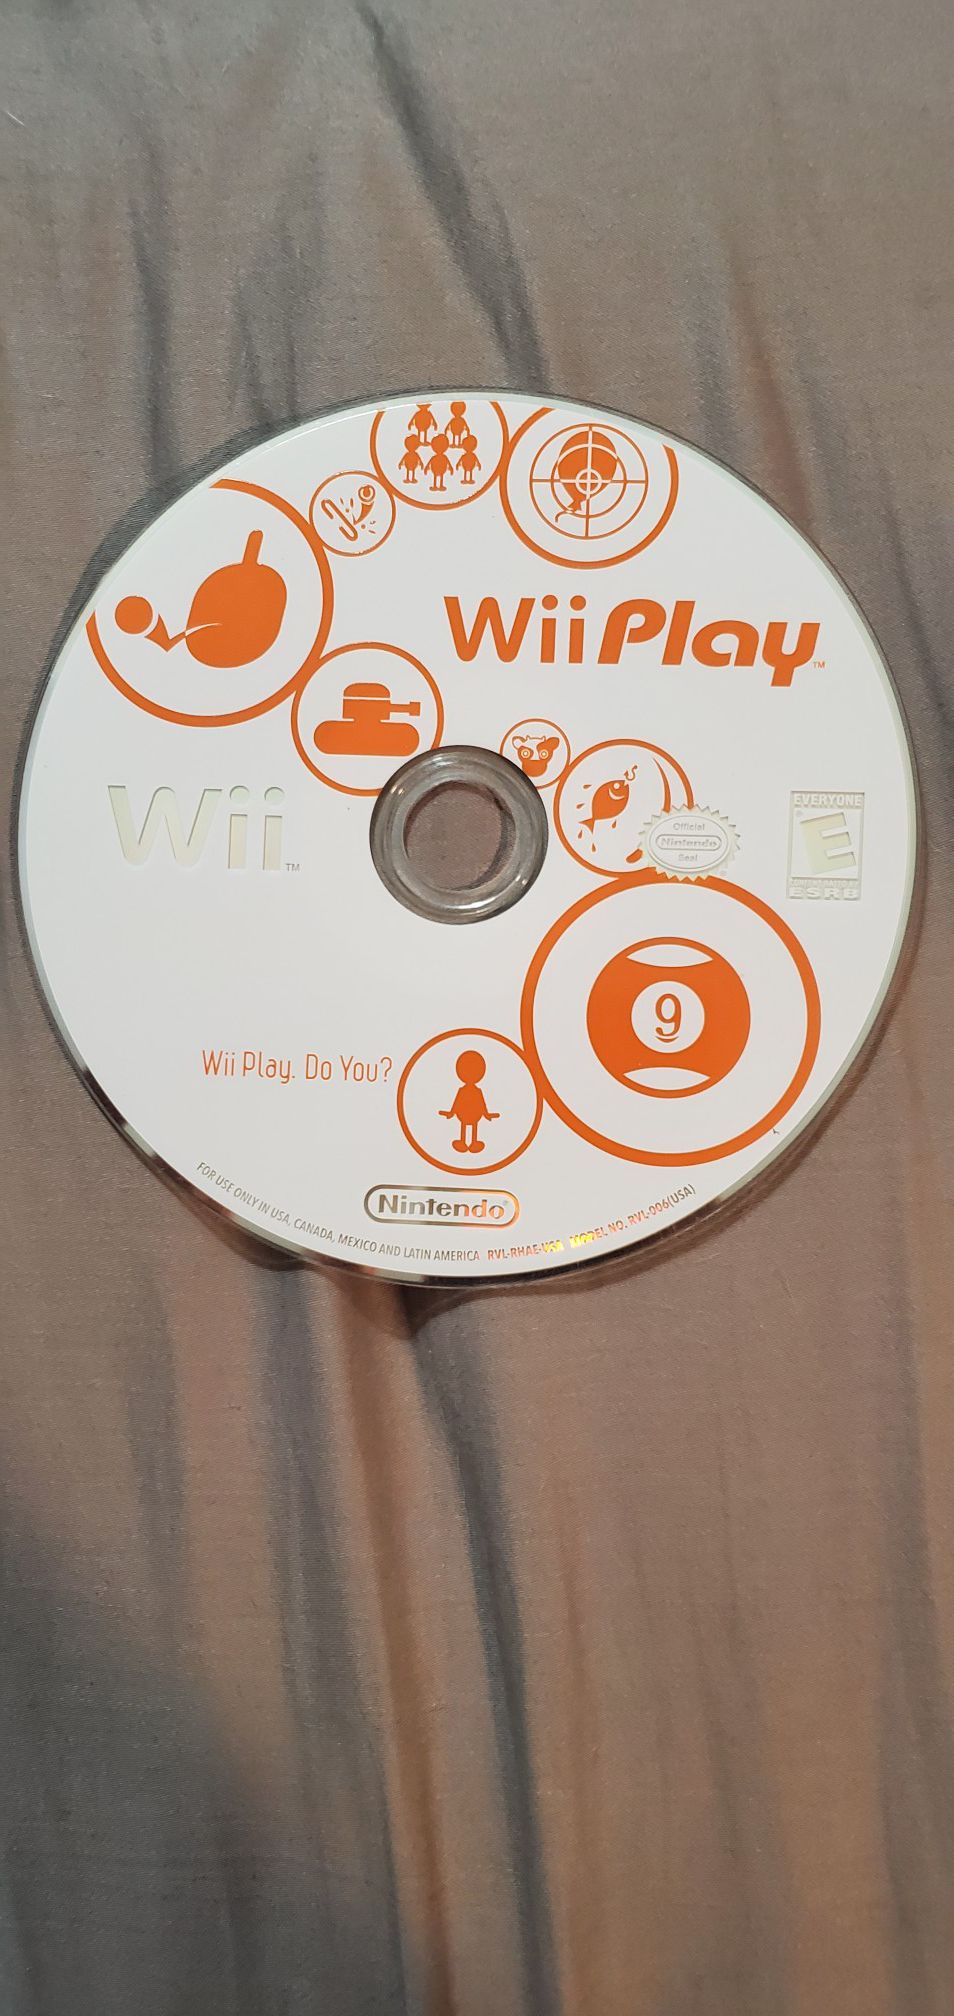 Wii Play CD